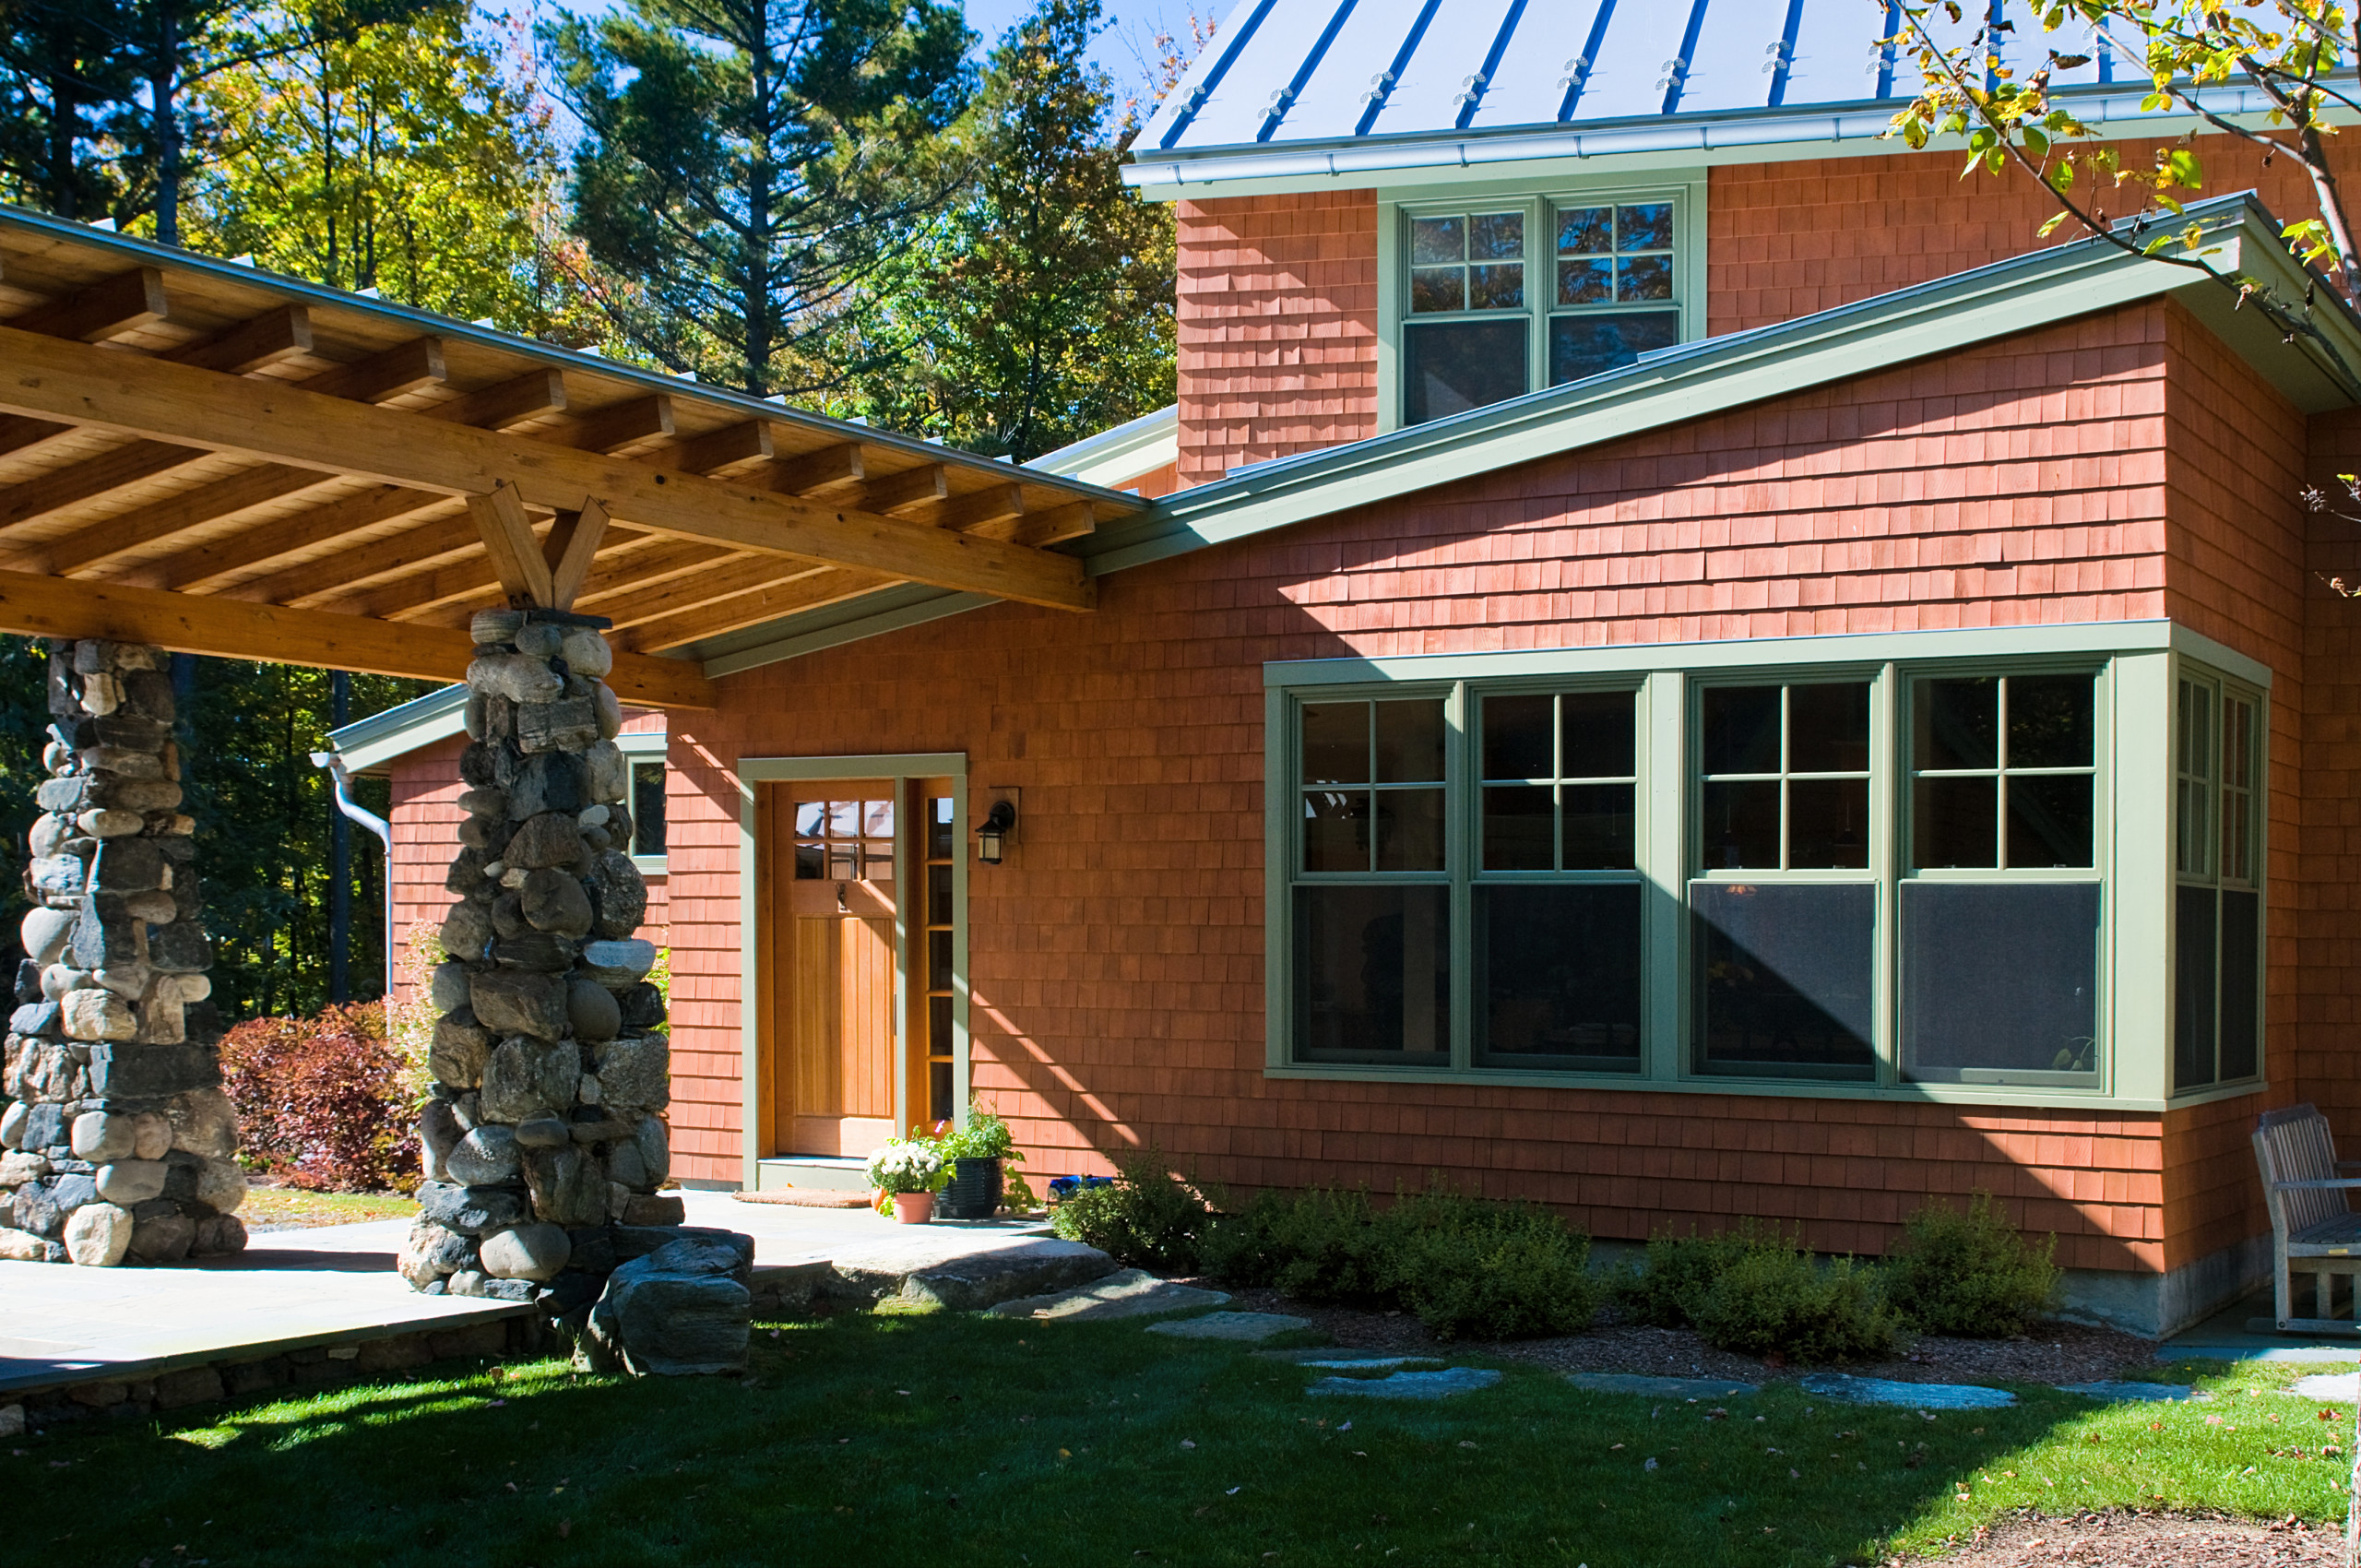 A laminated pine beam loggia connects the foyer to the garage/workshop, separating the parking area from the courtyard.